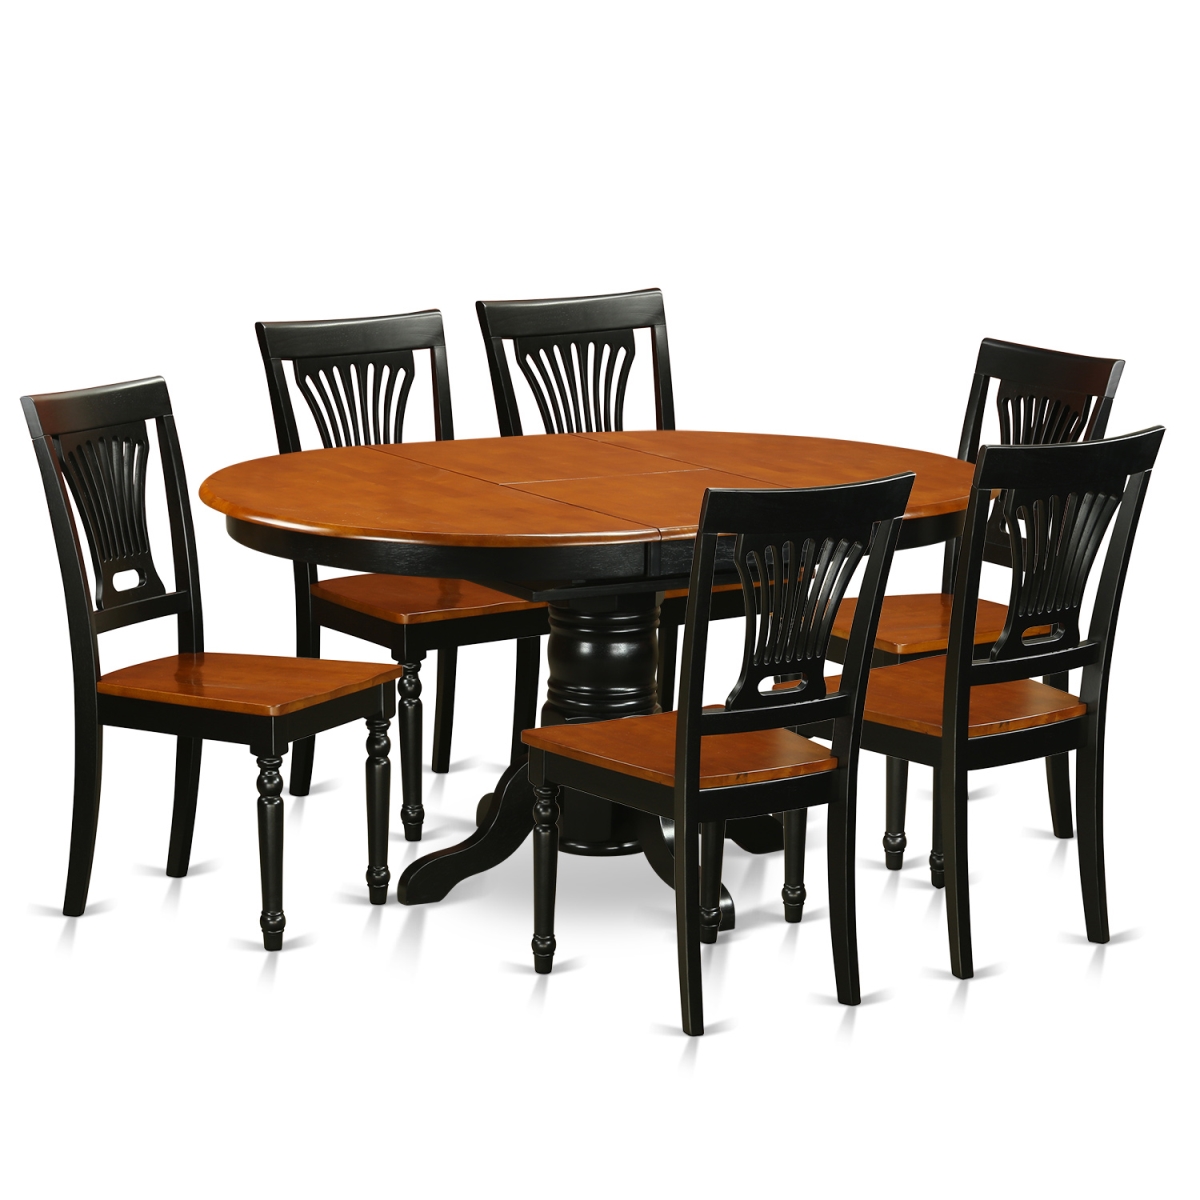 Picture of East West Furniture AVPL7-BCH-W Dining Set with 6 Solid Wooden Chairs, Black & Cherry - 7 Piece